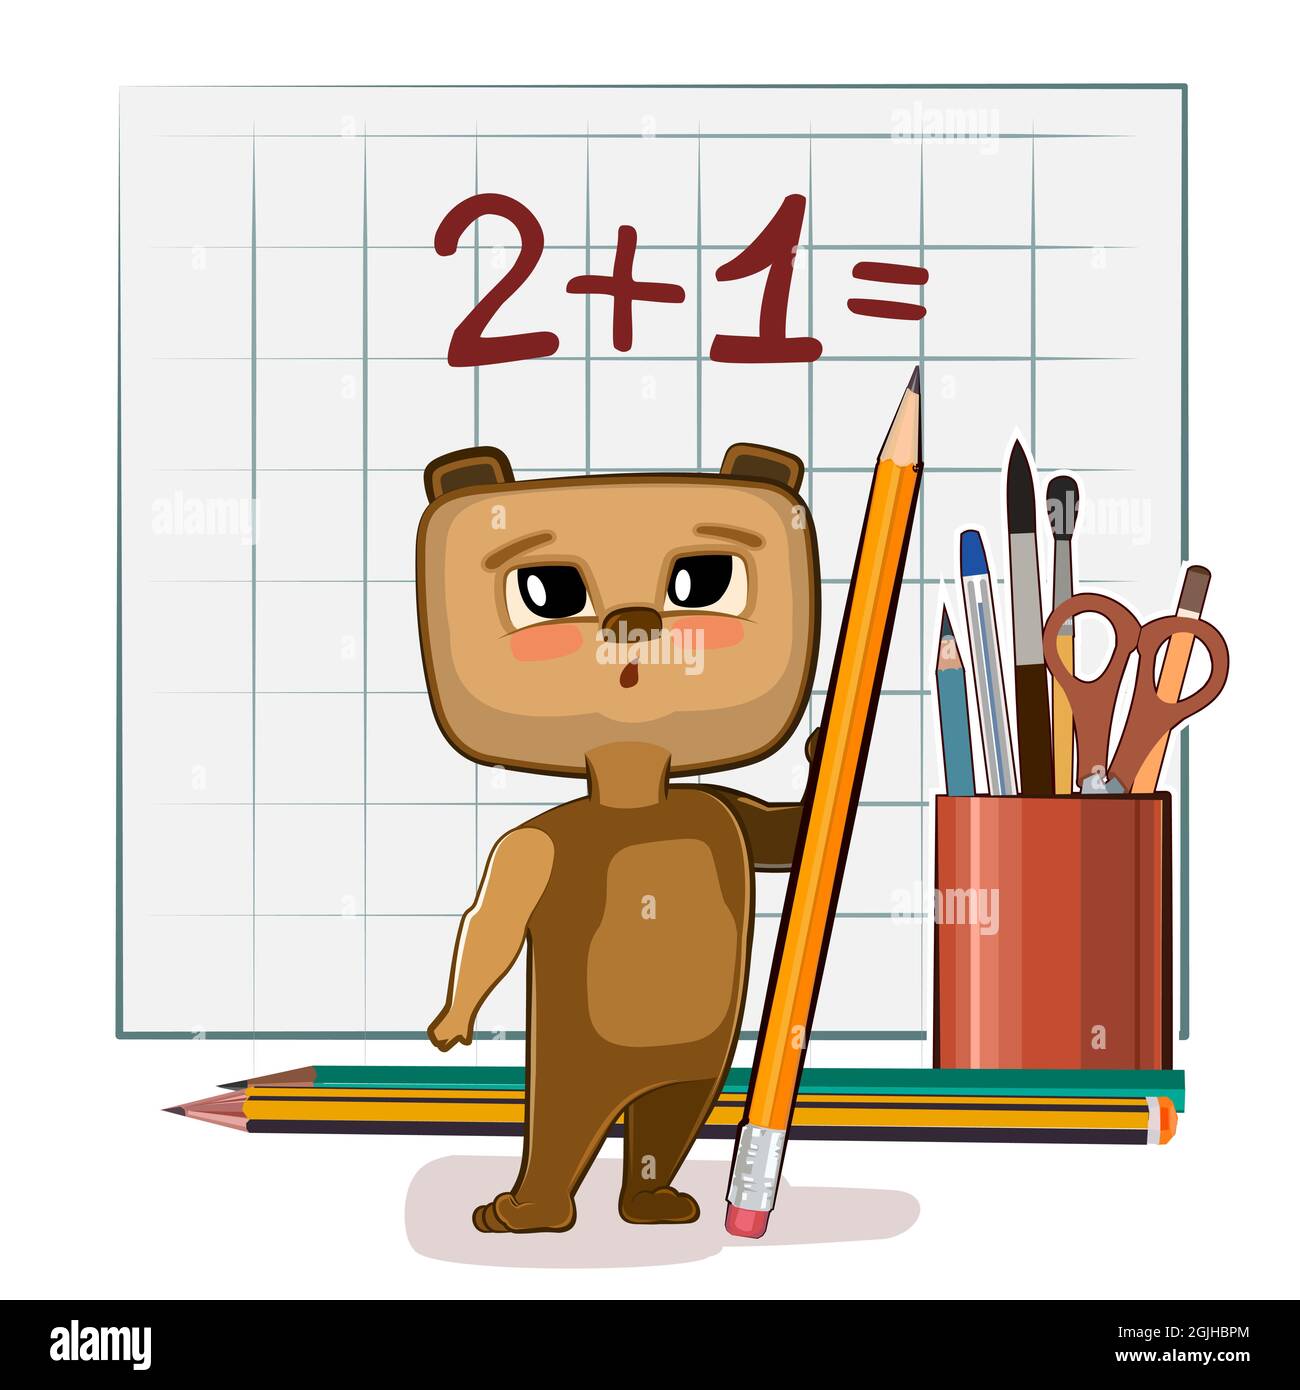 Cute Bear baby is trying to count. Studying numbers and counting. Funny animal kid. Stationery and pencil. Writes in notebook. Mathematics illustratio Stock Vector